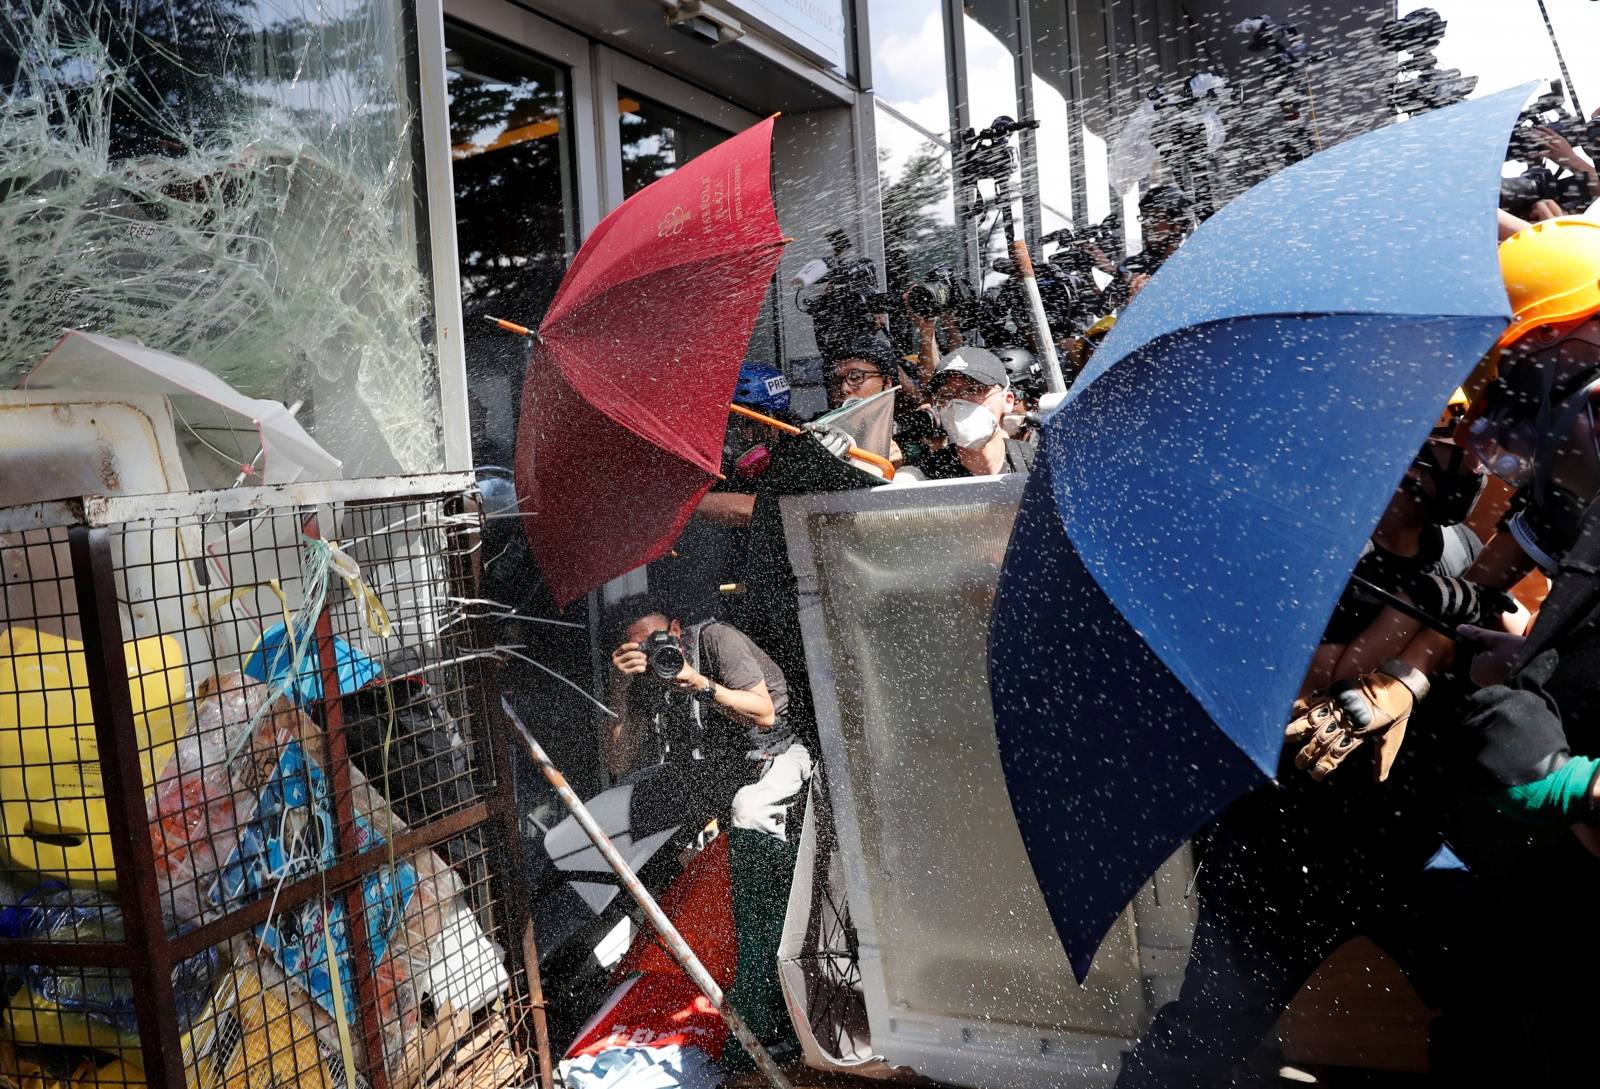 Riot police use pepper spray as protesters try to break into the Legislative Council building during the anniversary of Hong Kong's handover to China in Hong Kong